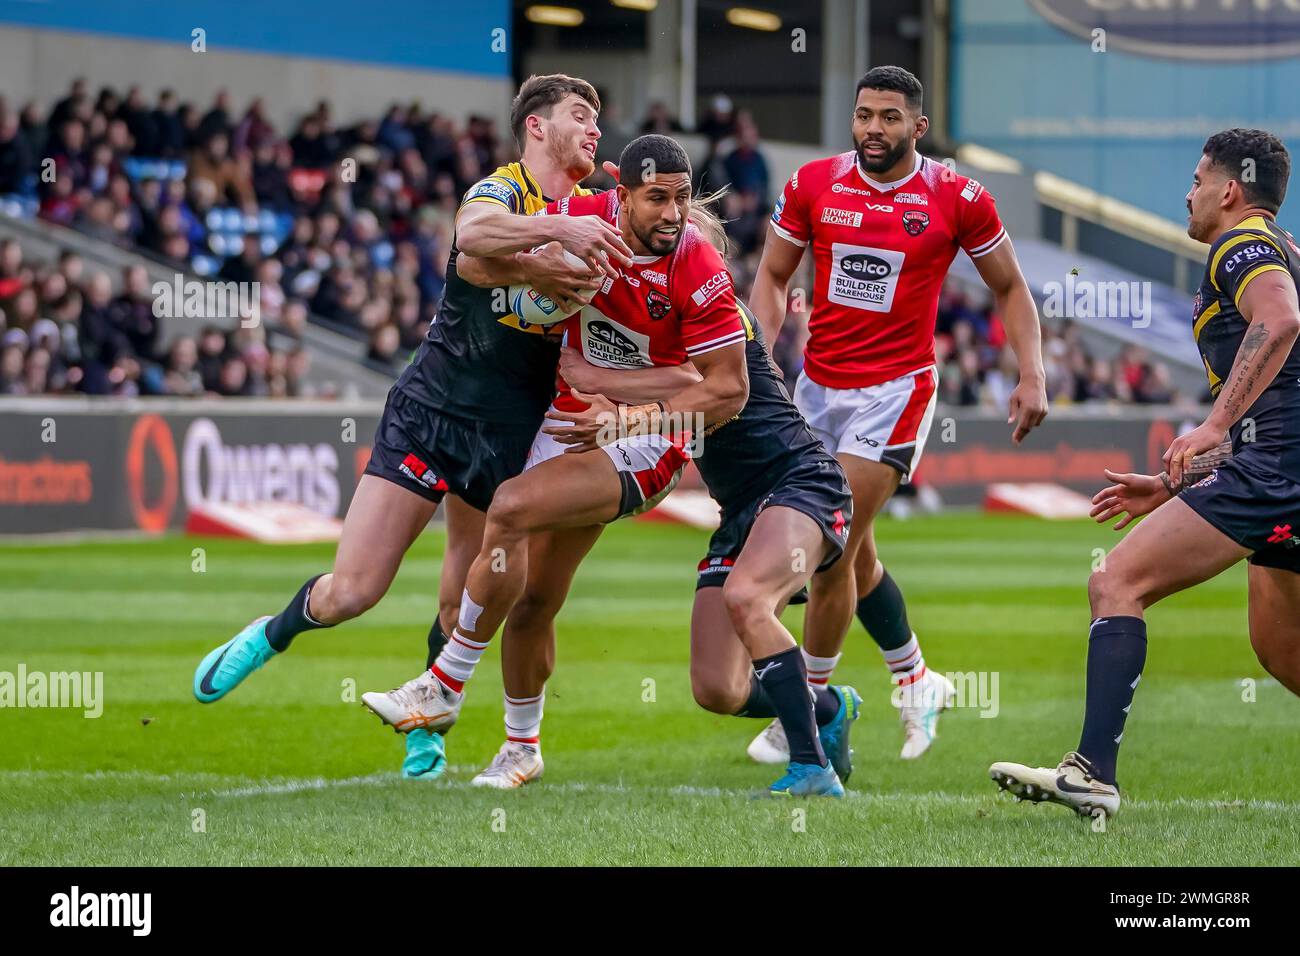 NENE MACDONALD getting through the castleford defence. Salford Red Devils Vs Castleford Tigers Betfred Super League Round 2, Salford Community Stadium, 25th February 2024. Credit: James Giblin/Alamy Live News. Stock Photo